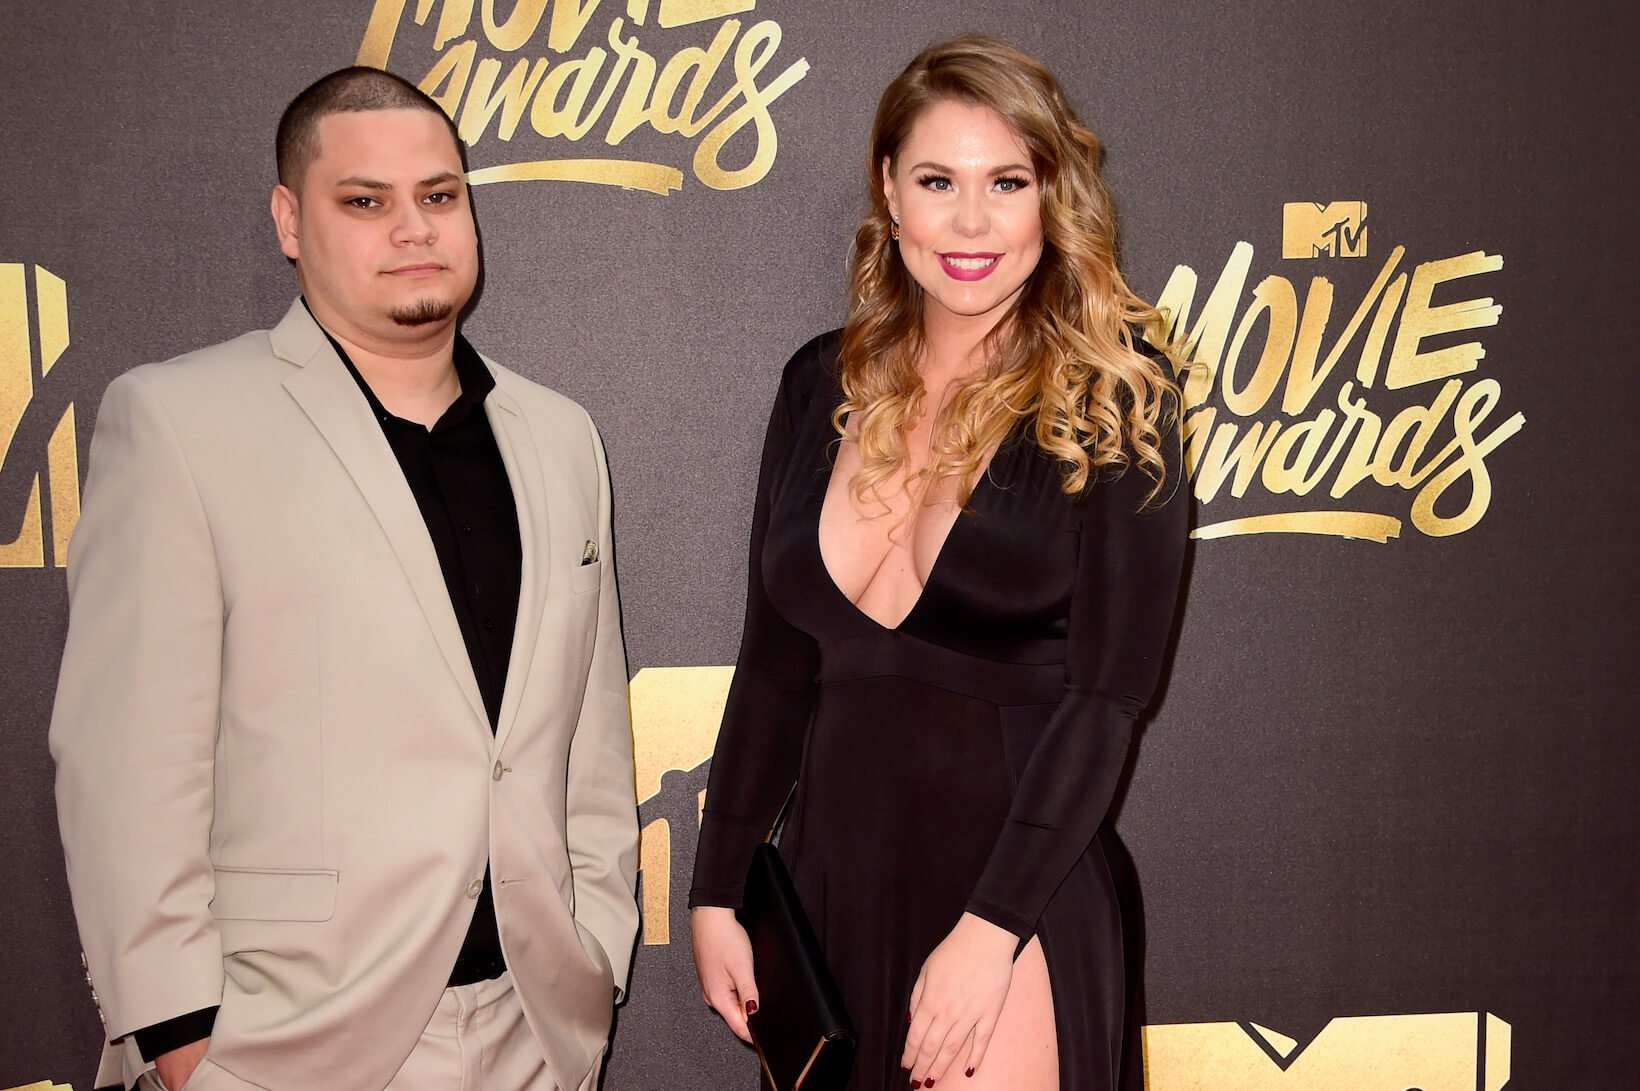 'Teen Mom' stars Jo Rivera and Kailyn Lowry standing next to each other at an event